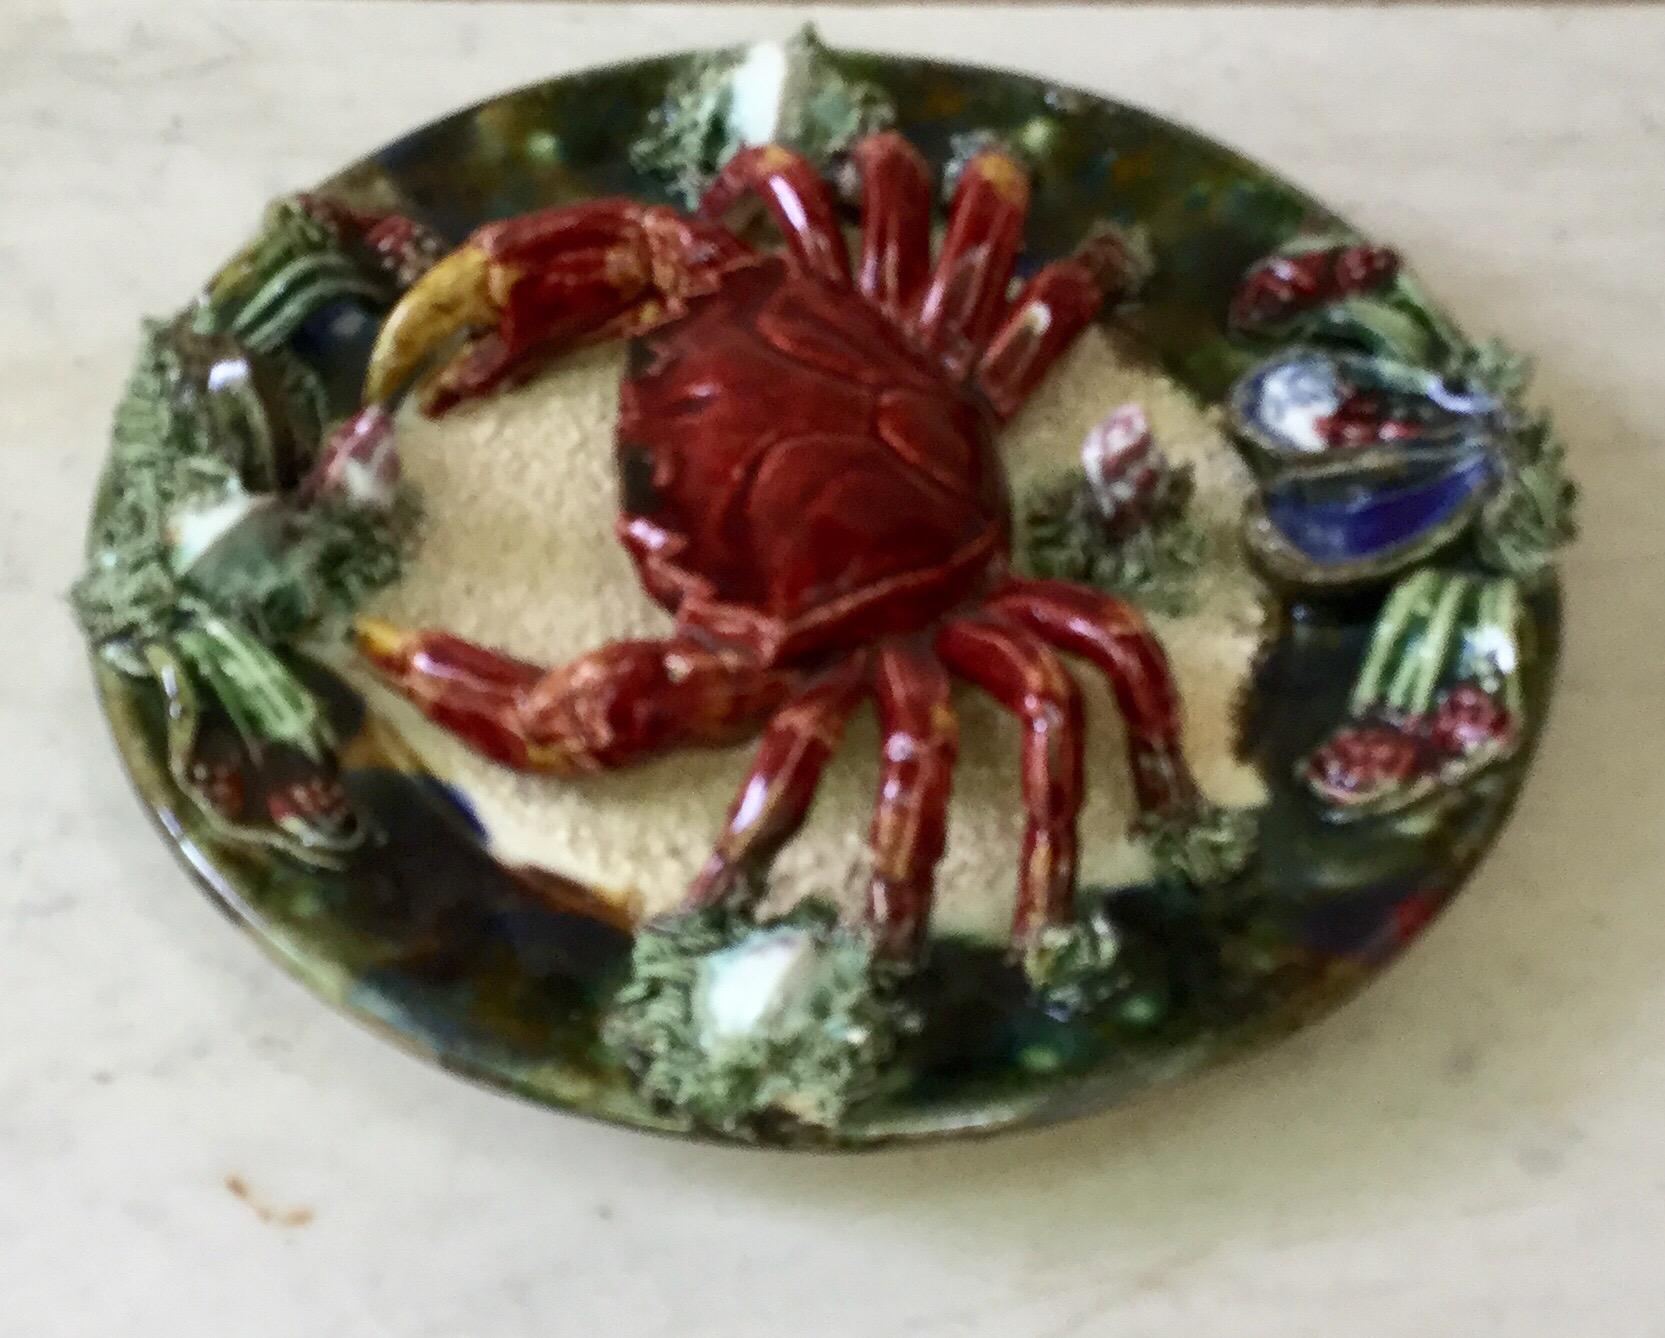 Majolica faience Palissy Portuguese crab platter, circa 1940.
Decorated with mussels and shells,
Signed Caldas da Rainha.